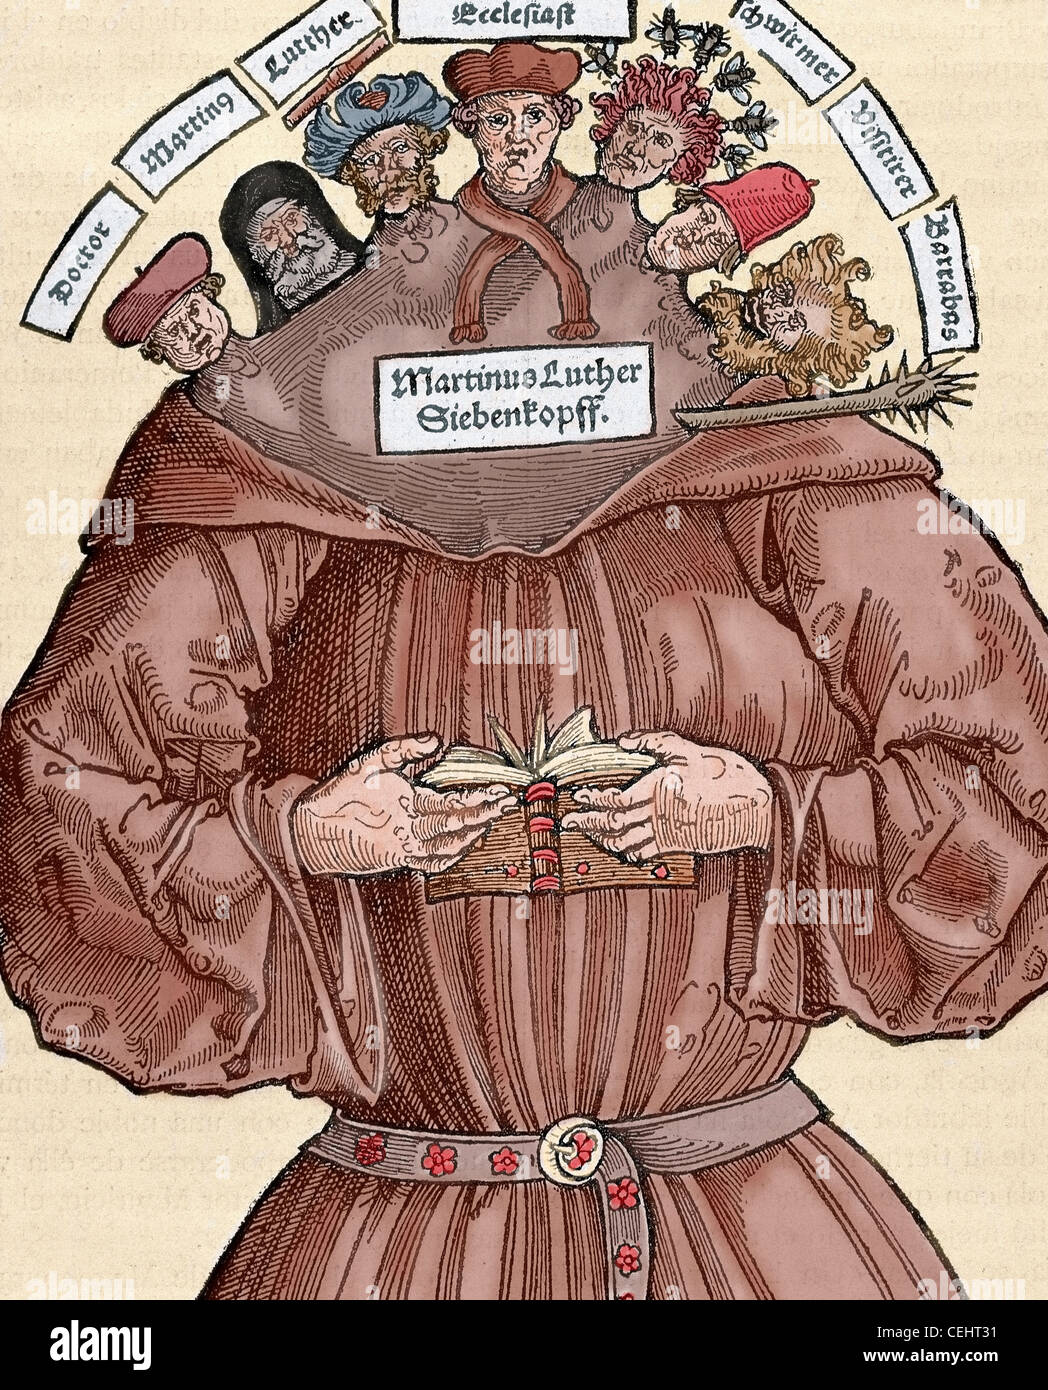 Protestant Reformation. 16th century. Germany. Satire against Martin Luther (1483-1546). Colored engraving. Stock Photo